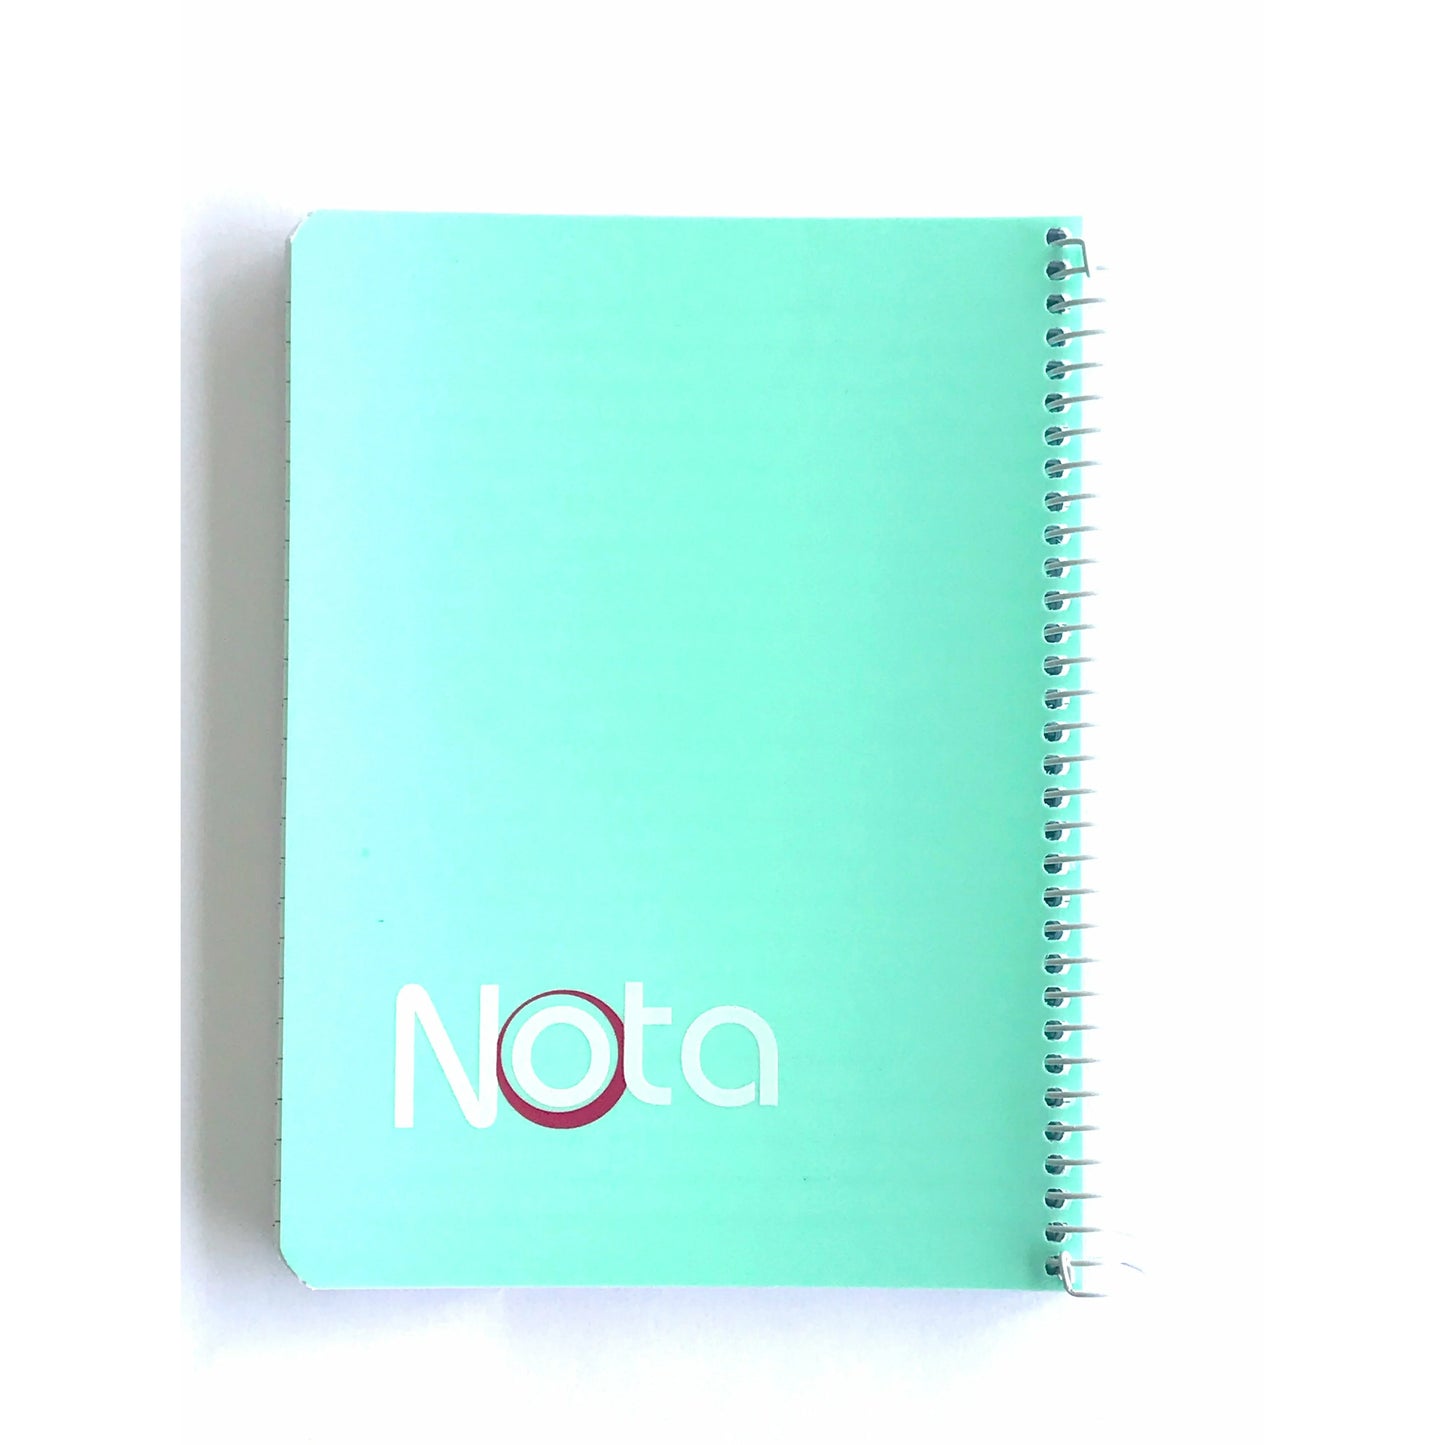 Bassile Nota 12x16cm Spiral Notebook 96 Sheets